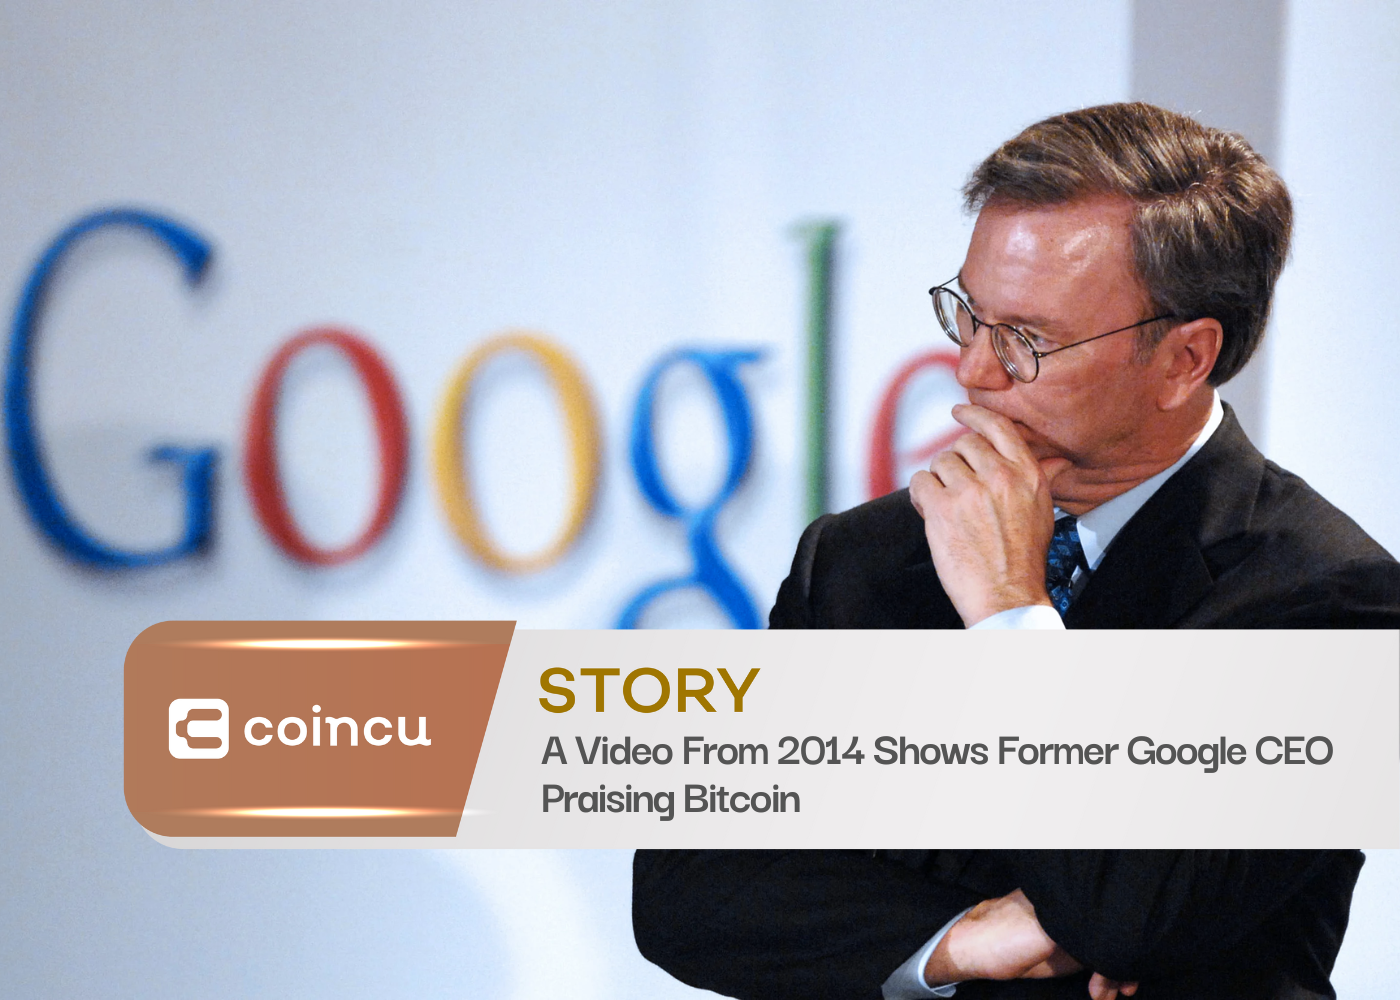 A Video From 2014 Shows Former Google CEO Praising Bitcoin